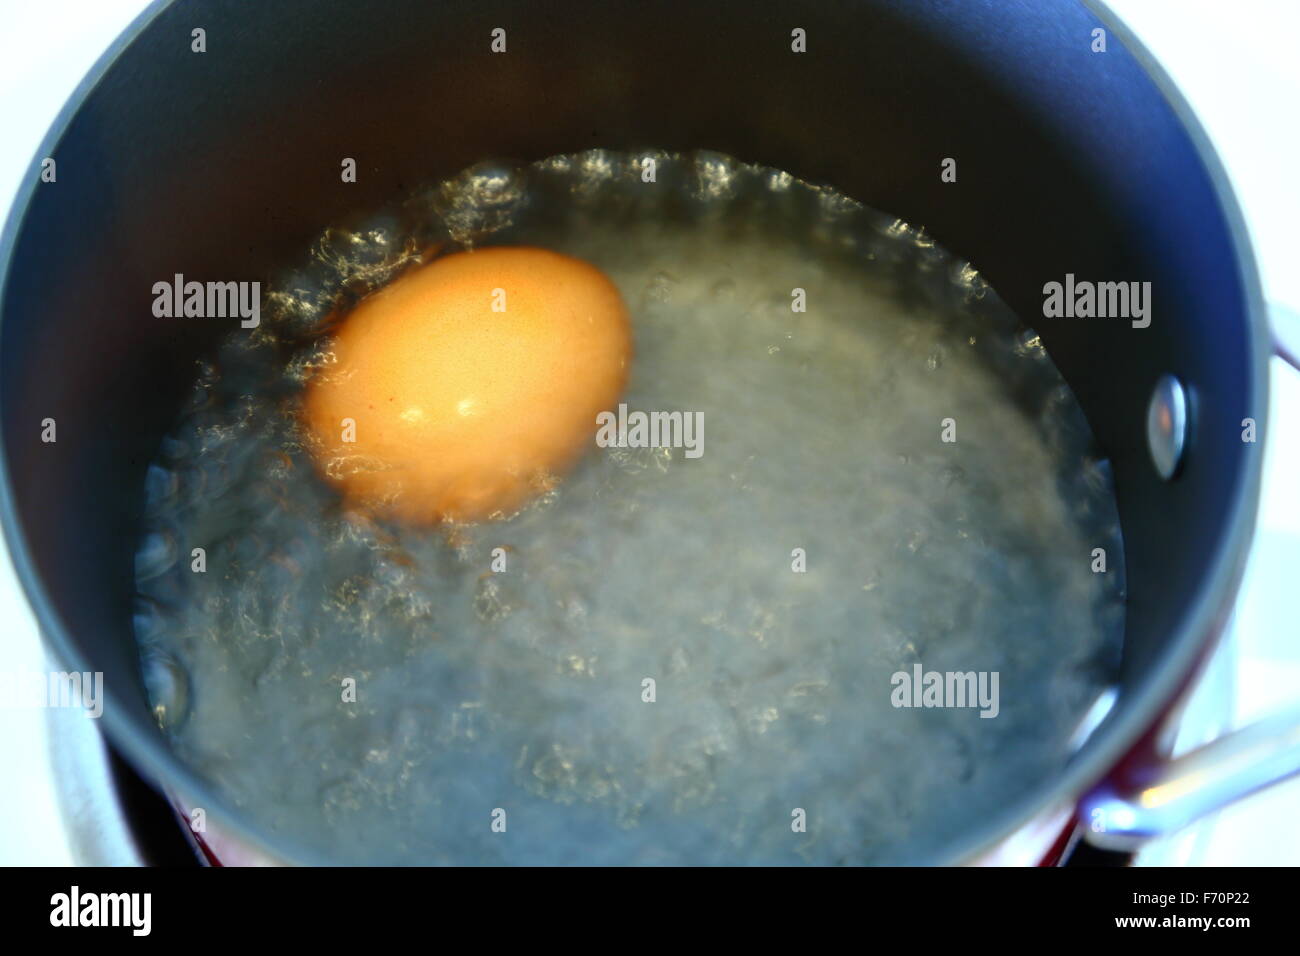 An egg boiling in a red pot on a stove top, viewed from above. Stock Photo